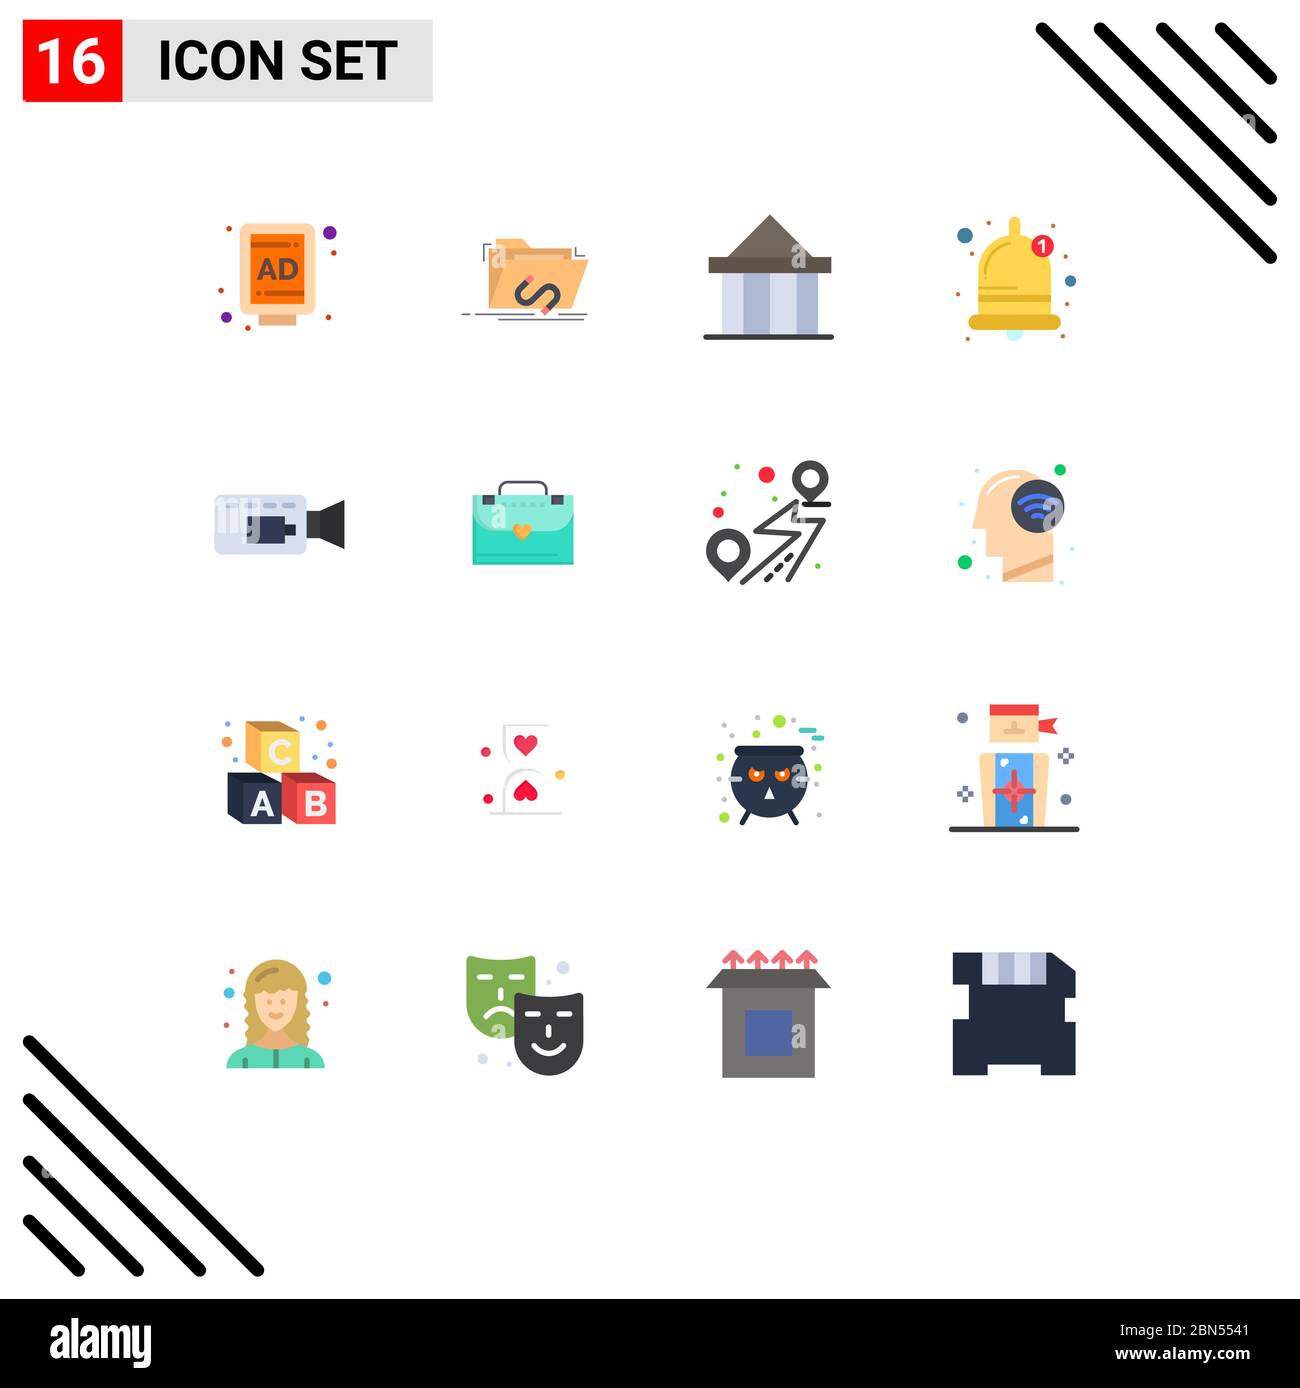 Set of 16 Modern UI Icons Symbols Signs for camera, sound, acropolis, bell, greece Editable Pack of Creative Vector Design Elements Stock Vector